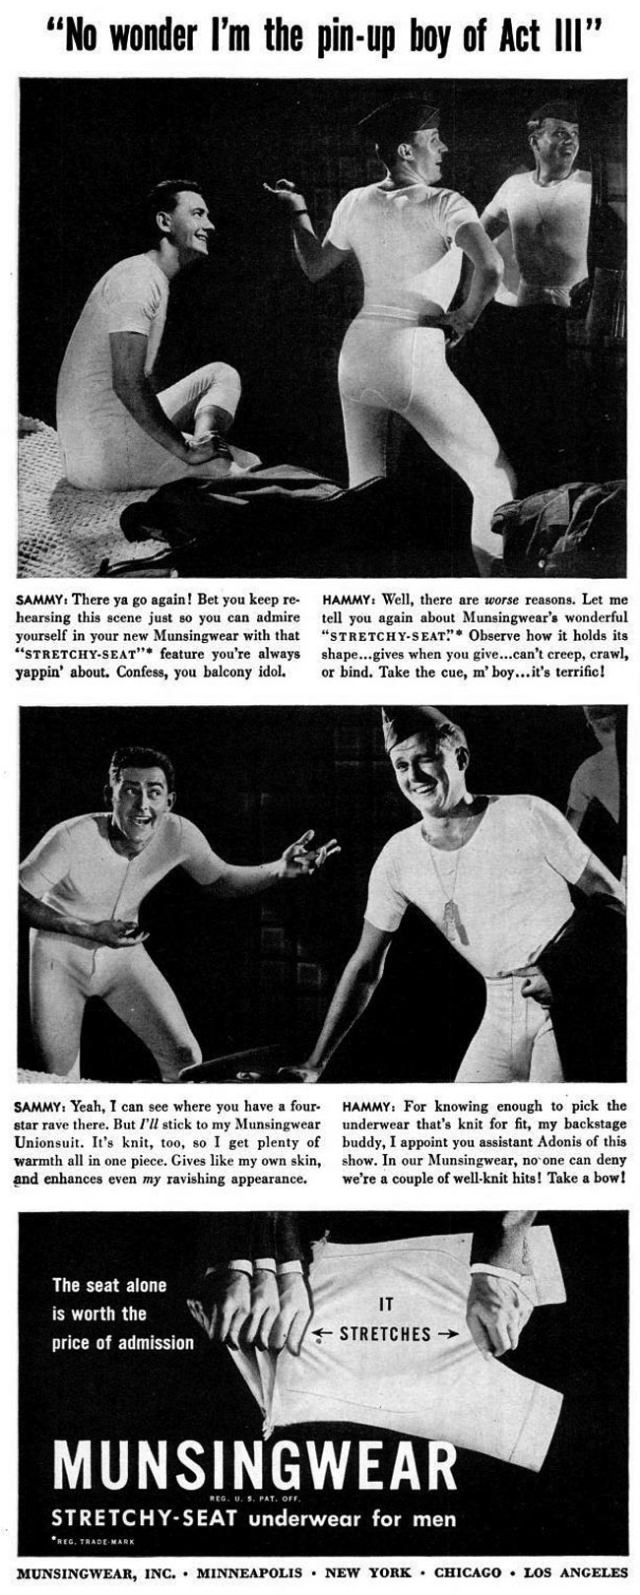 A Chuckle from the Past: Munsingwear's Men's Underwear Ads from the 1940s